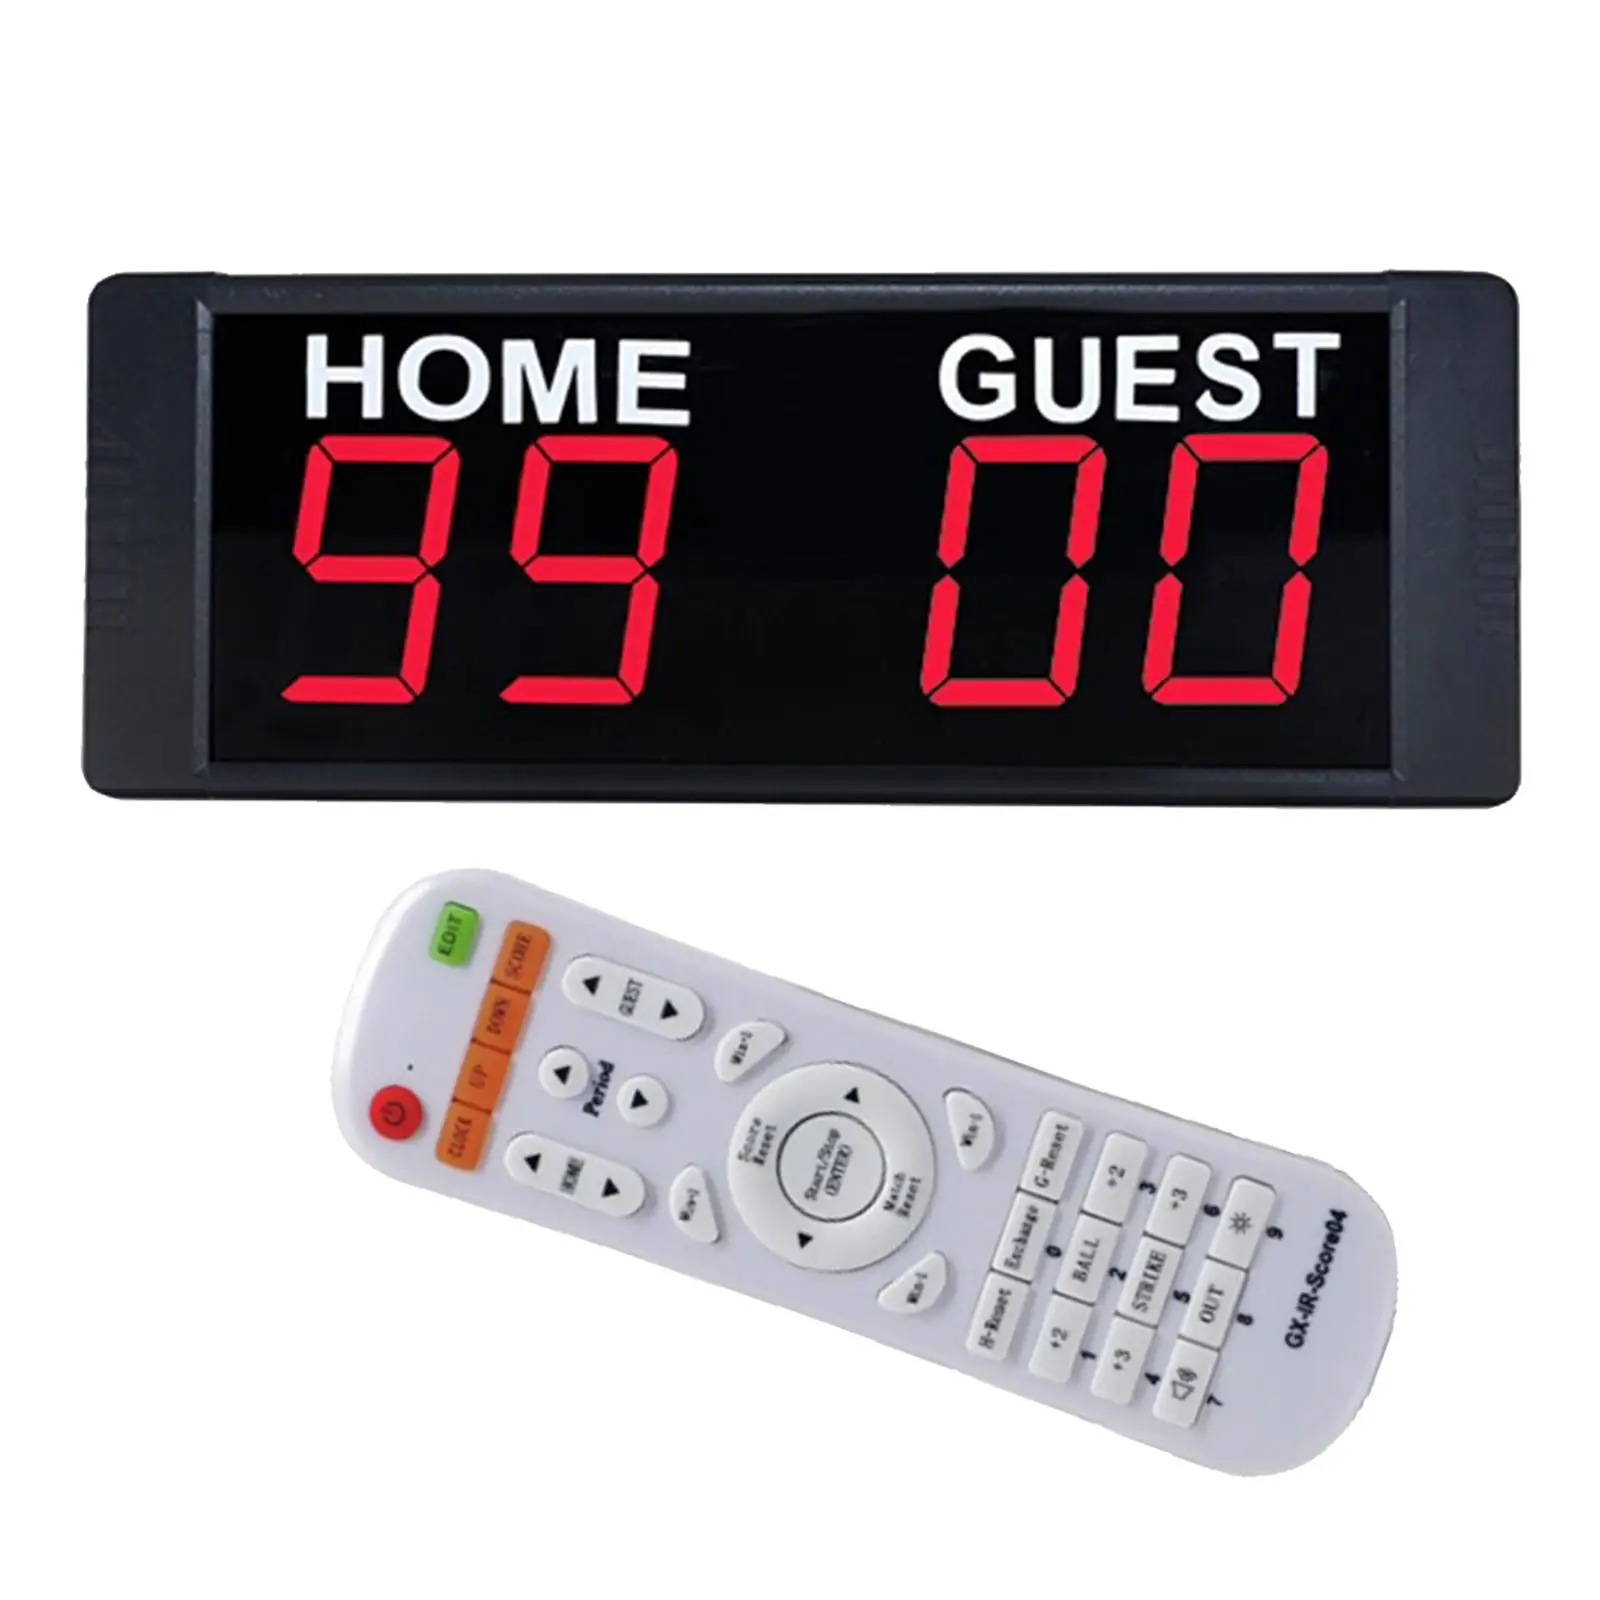 Multifunctional Electronic Digital Scoreboard Counter Counting Stopwatch Indoor Score Keeper for Soccer Wrestling Sports Tennis